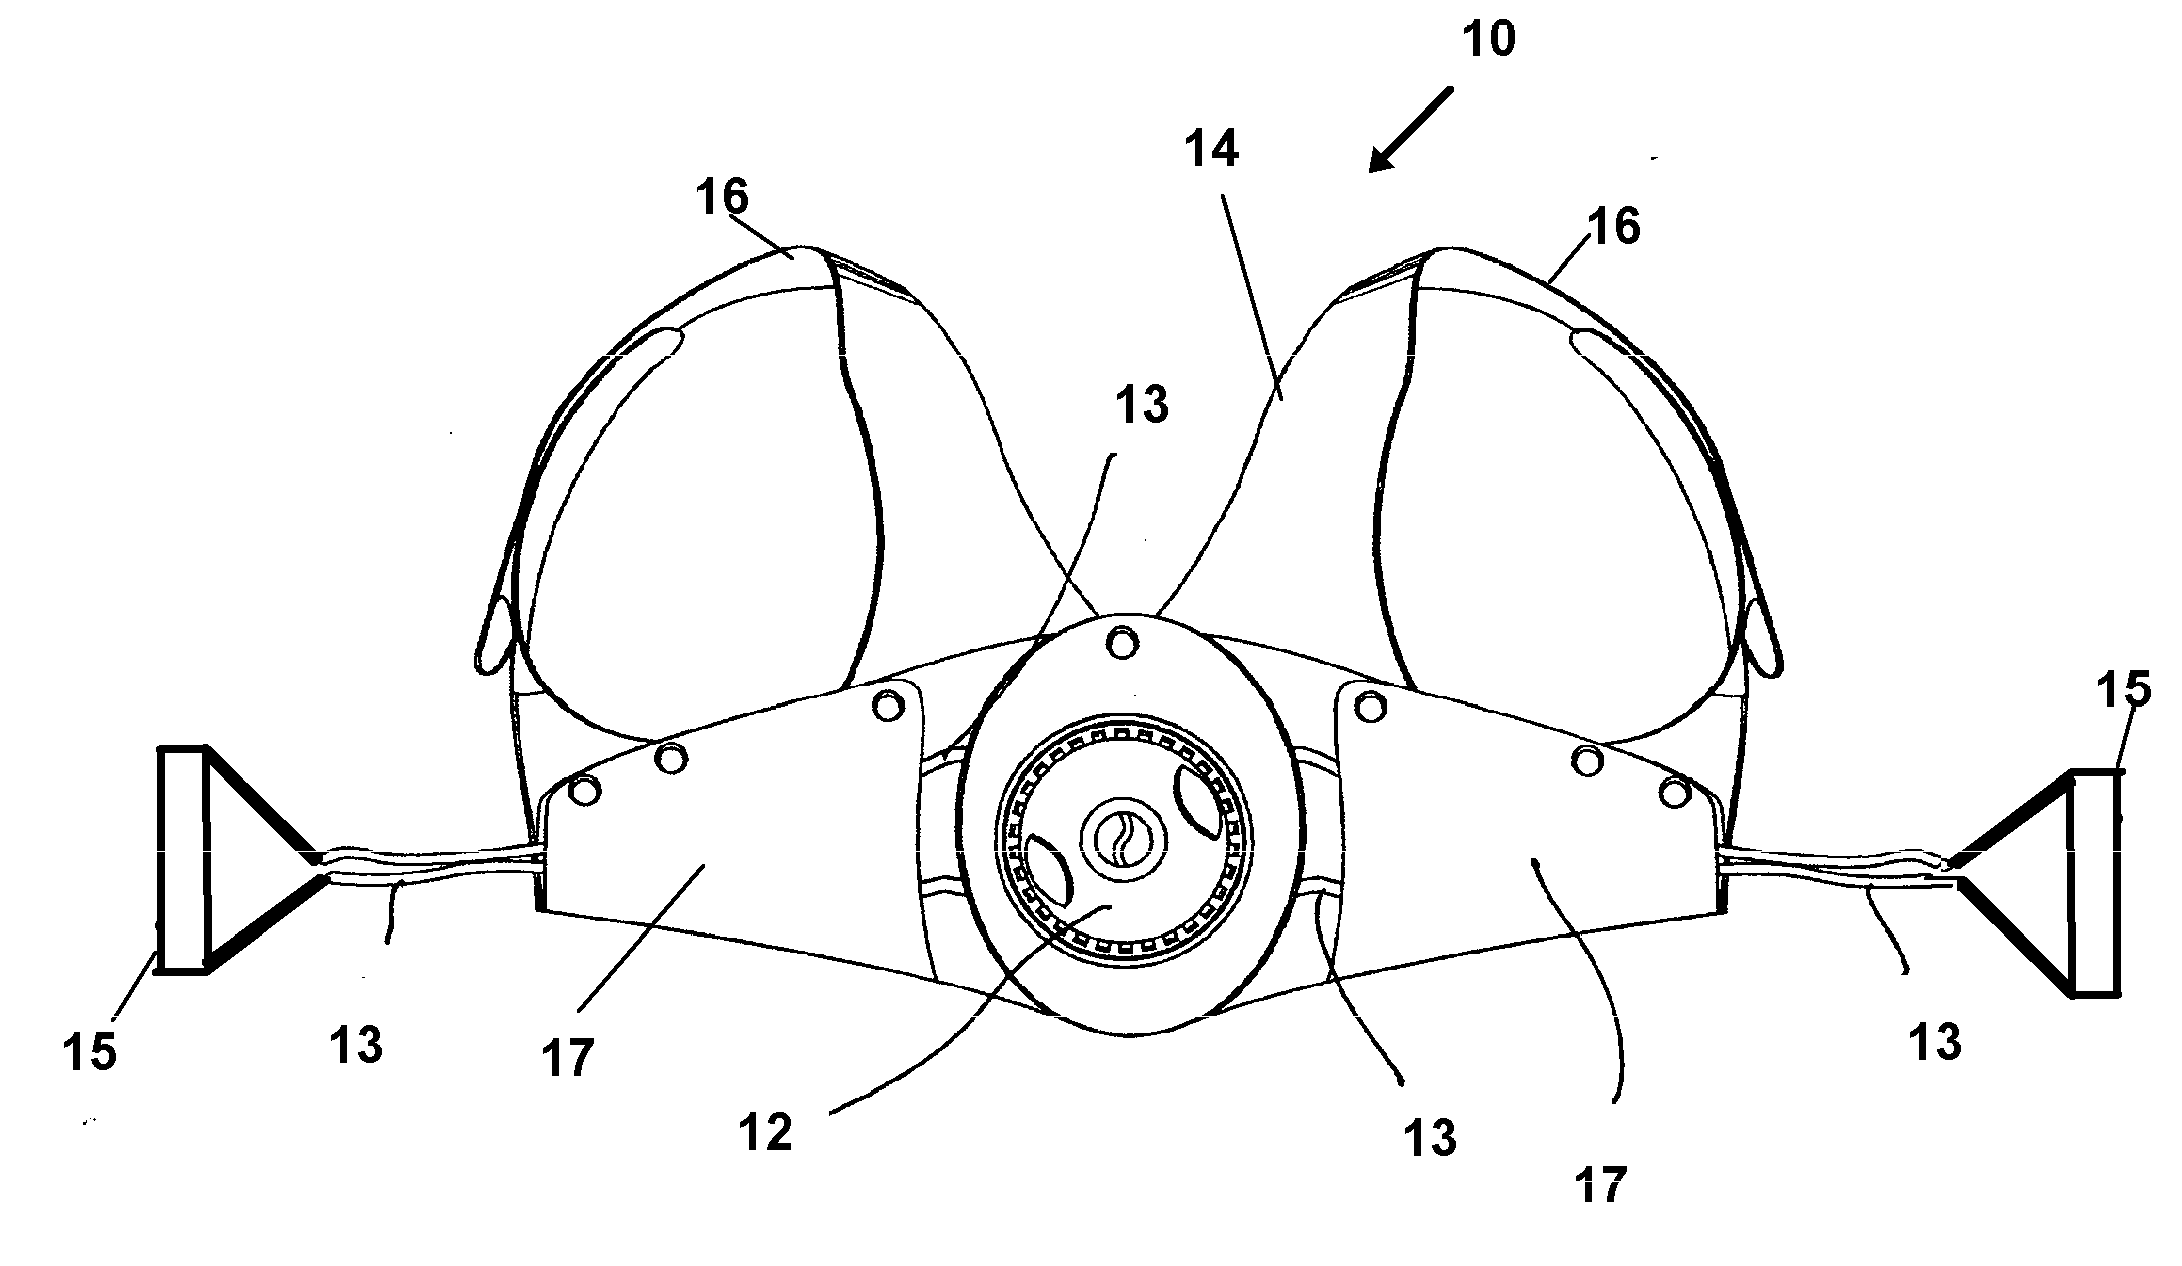 Physical Work-Out Device with Adjustable Elastic Bands